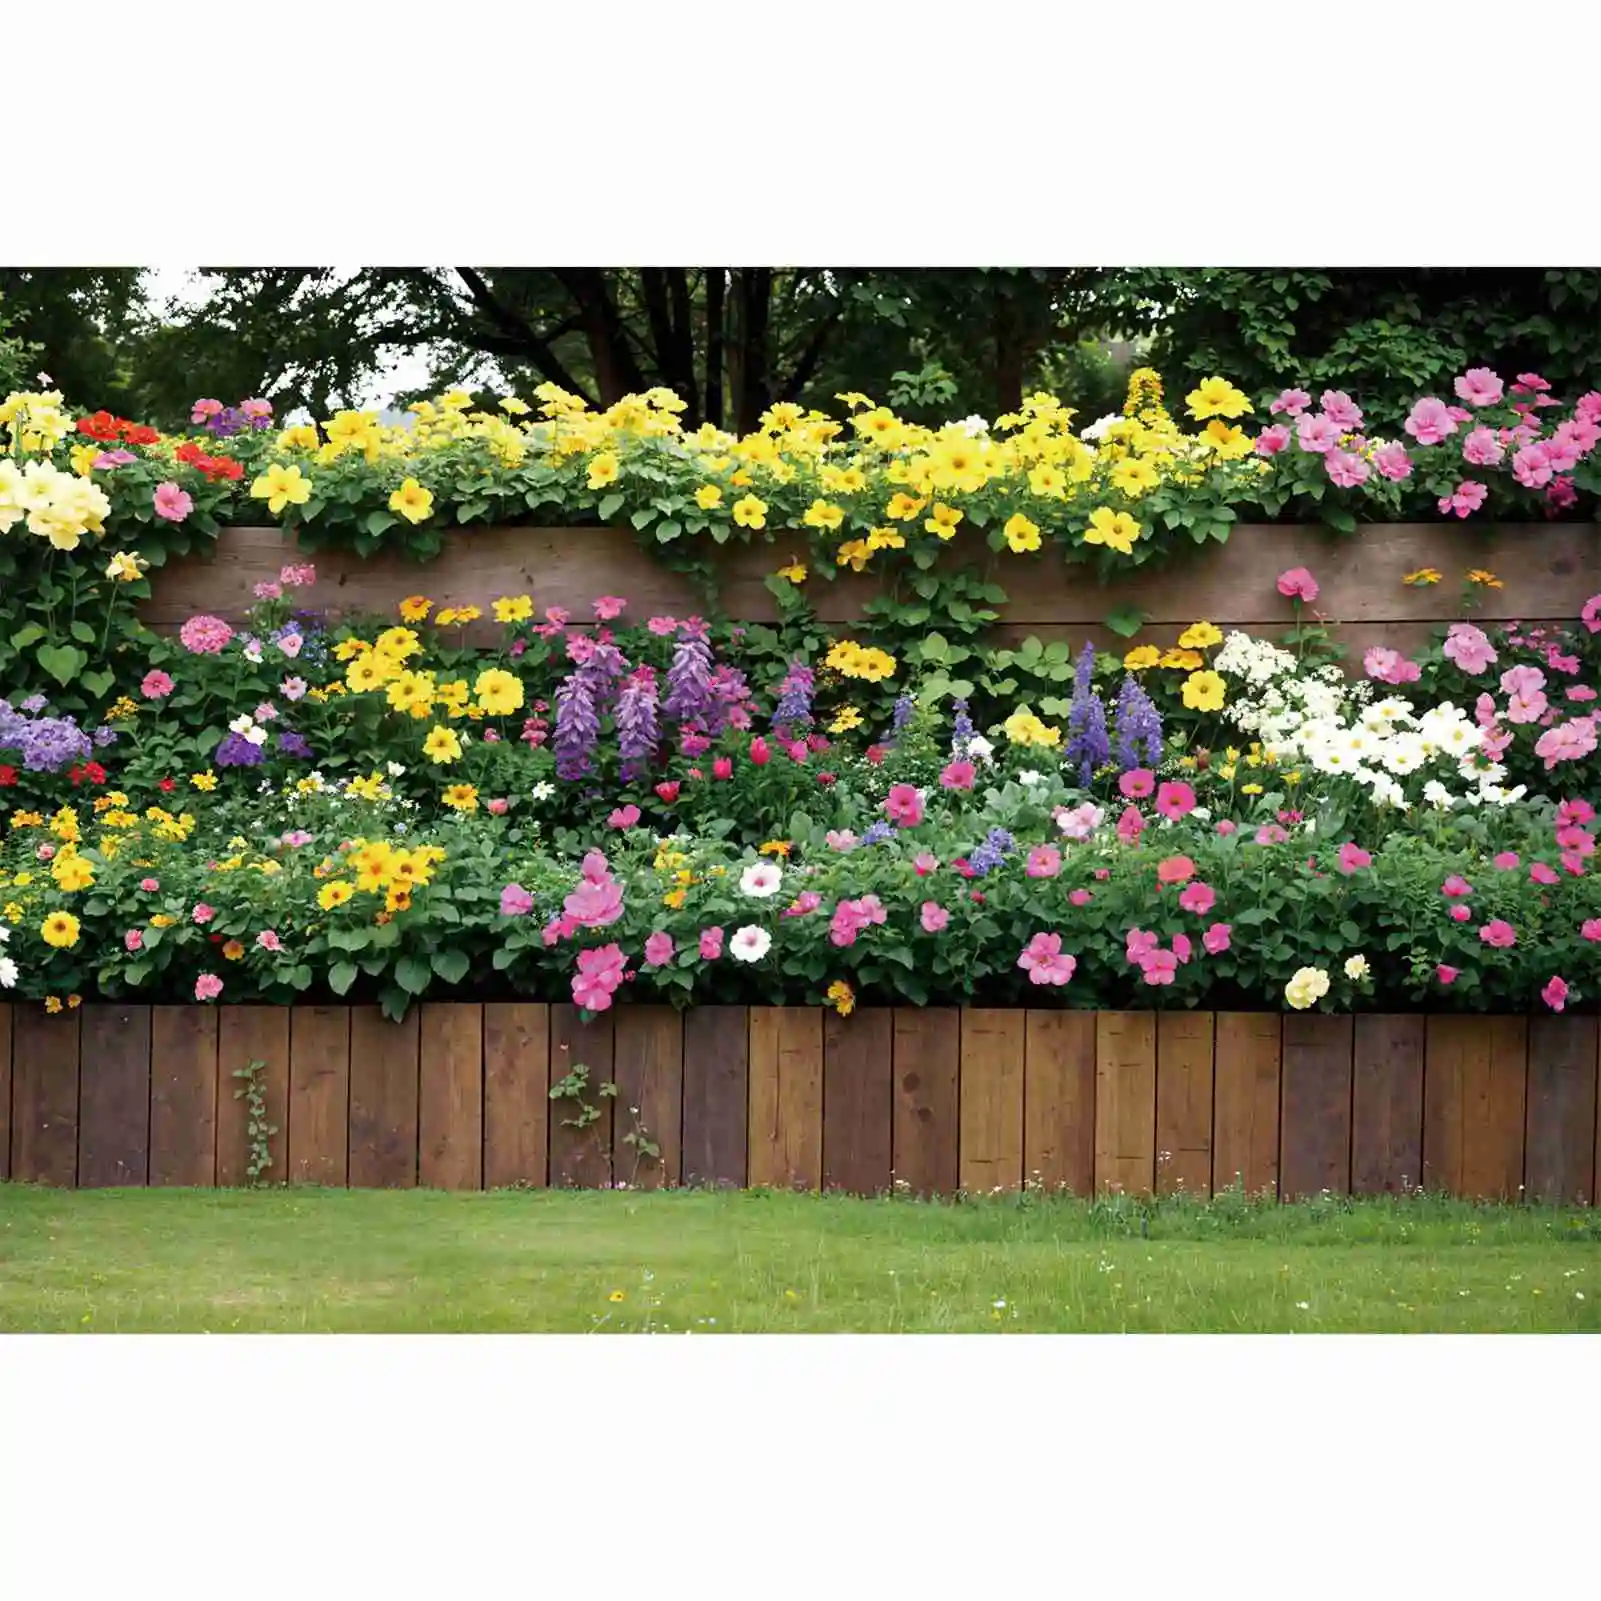 

Blossom Flower Garden Wall Photography Backdrops Grassland Wooden Fence Personalized Children Photobooth Photo Backgrounds